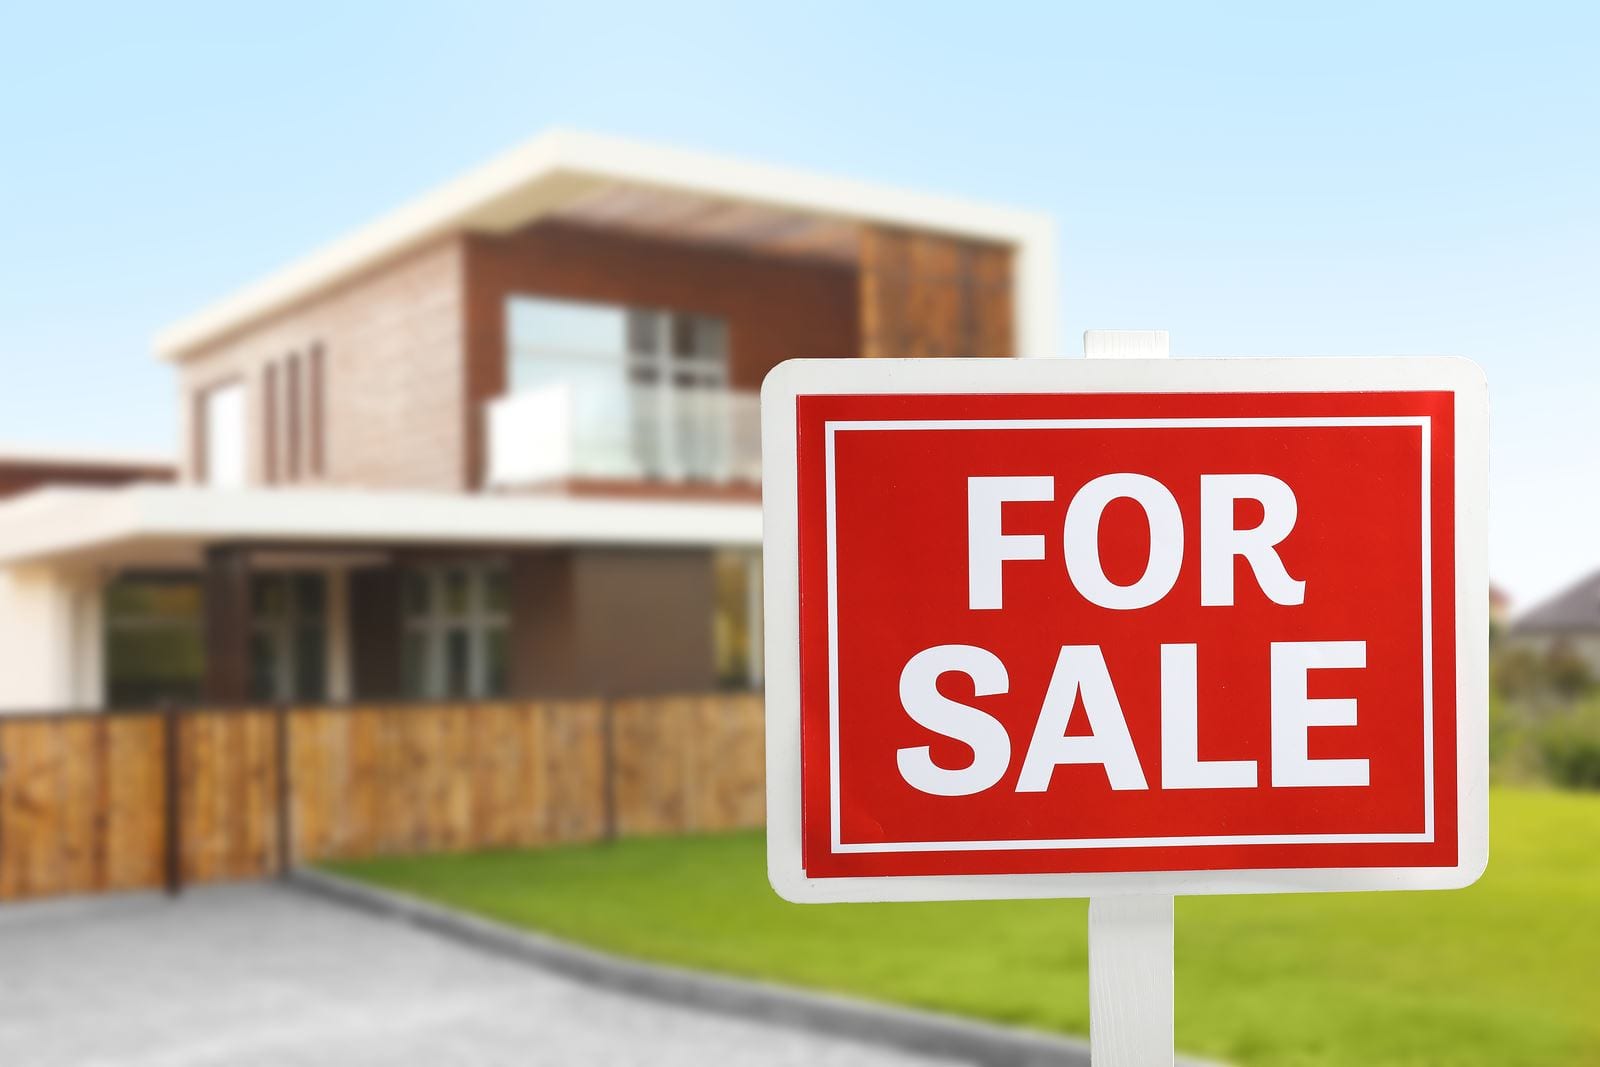 Sale of Property In Pakistan While Being Abroad